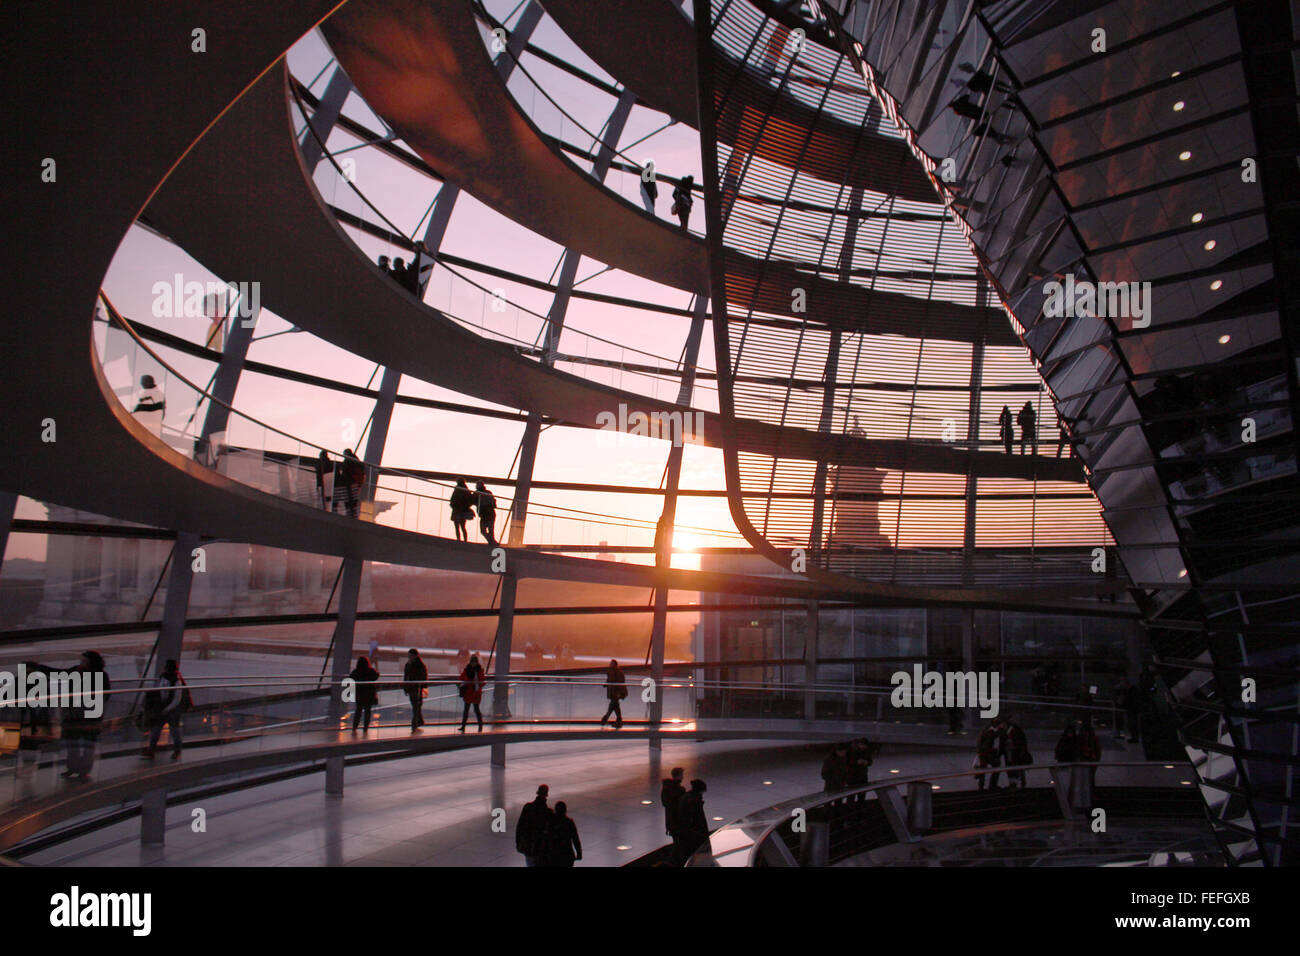 Germany Berlin Reichstag Parliament Interior of Glass Dome  design by Norman Foster  during sunset Stock Photo